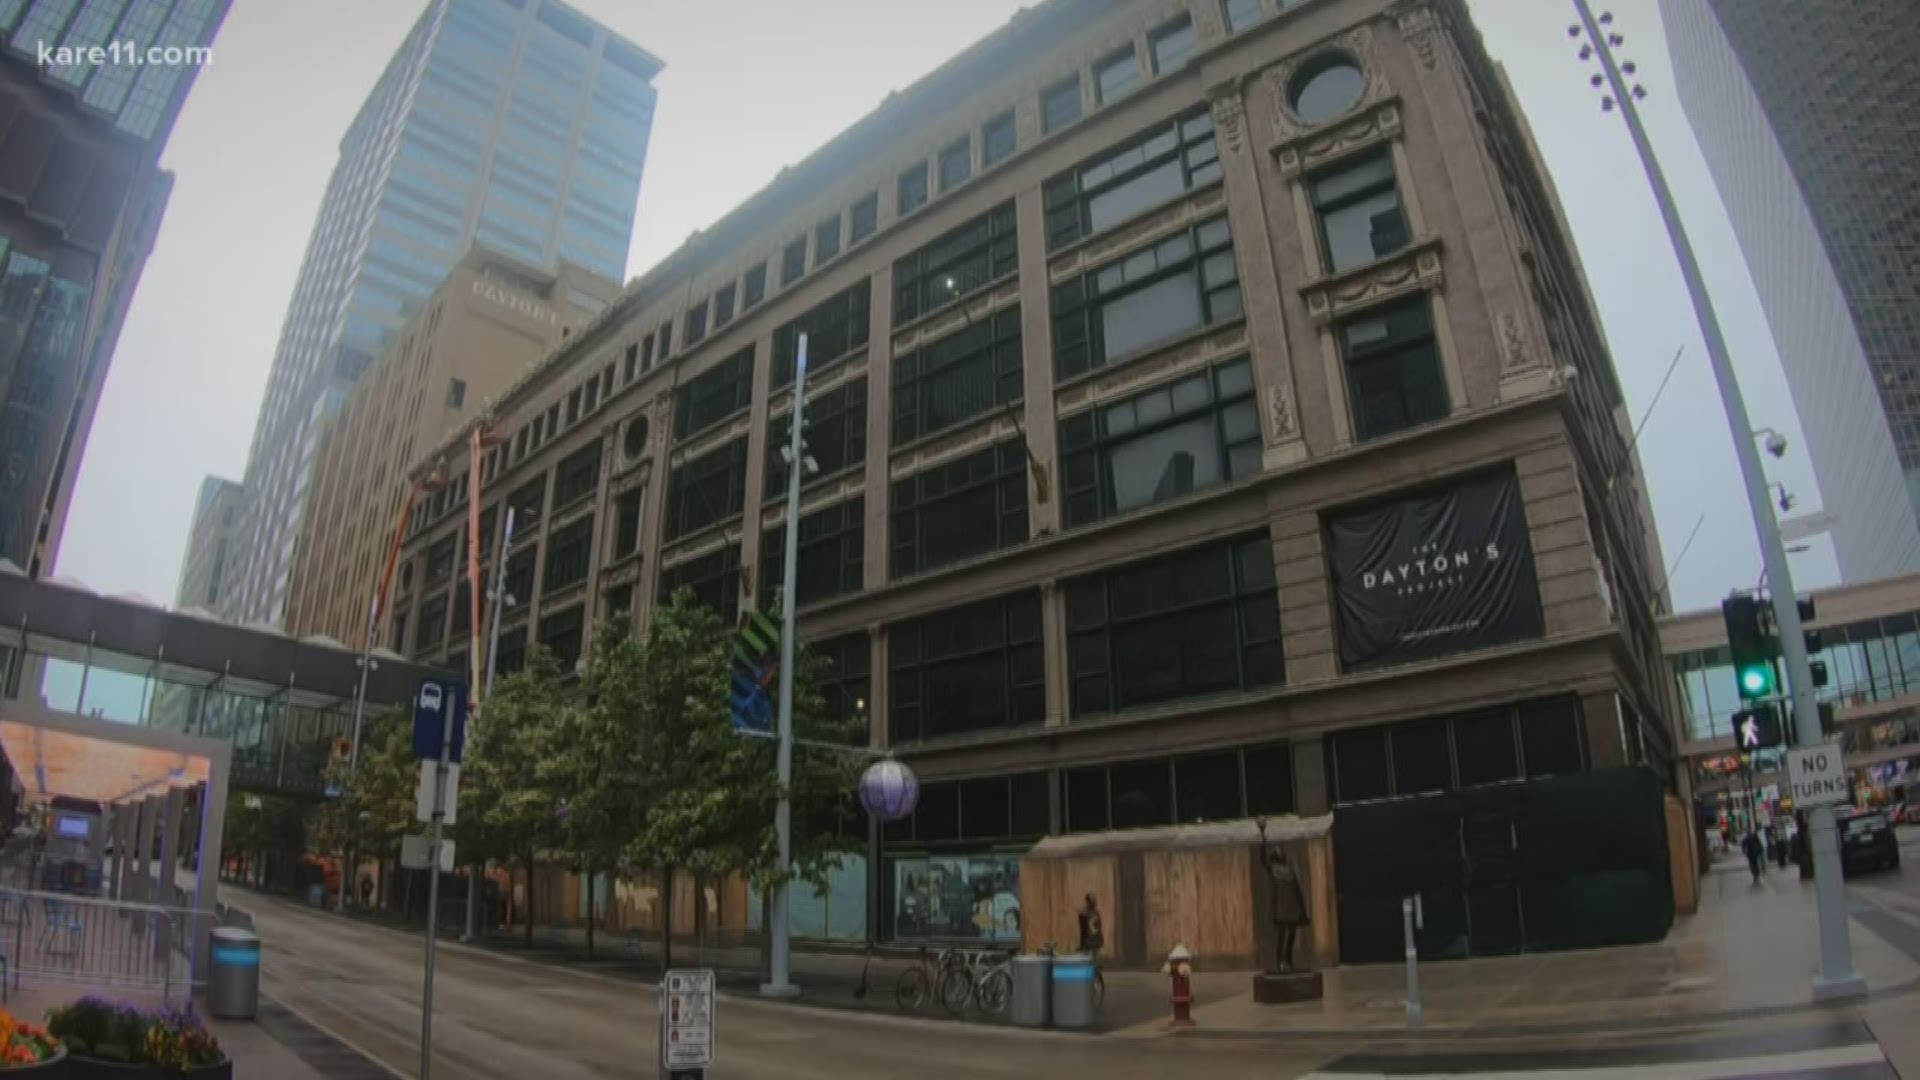 The development in downtown Minneapolis will include a food hall, retail, and office space.